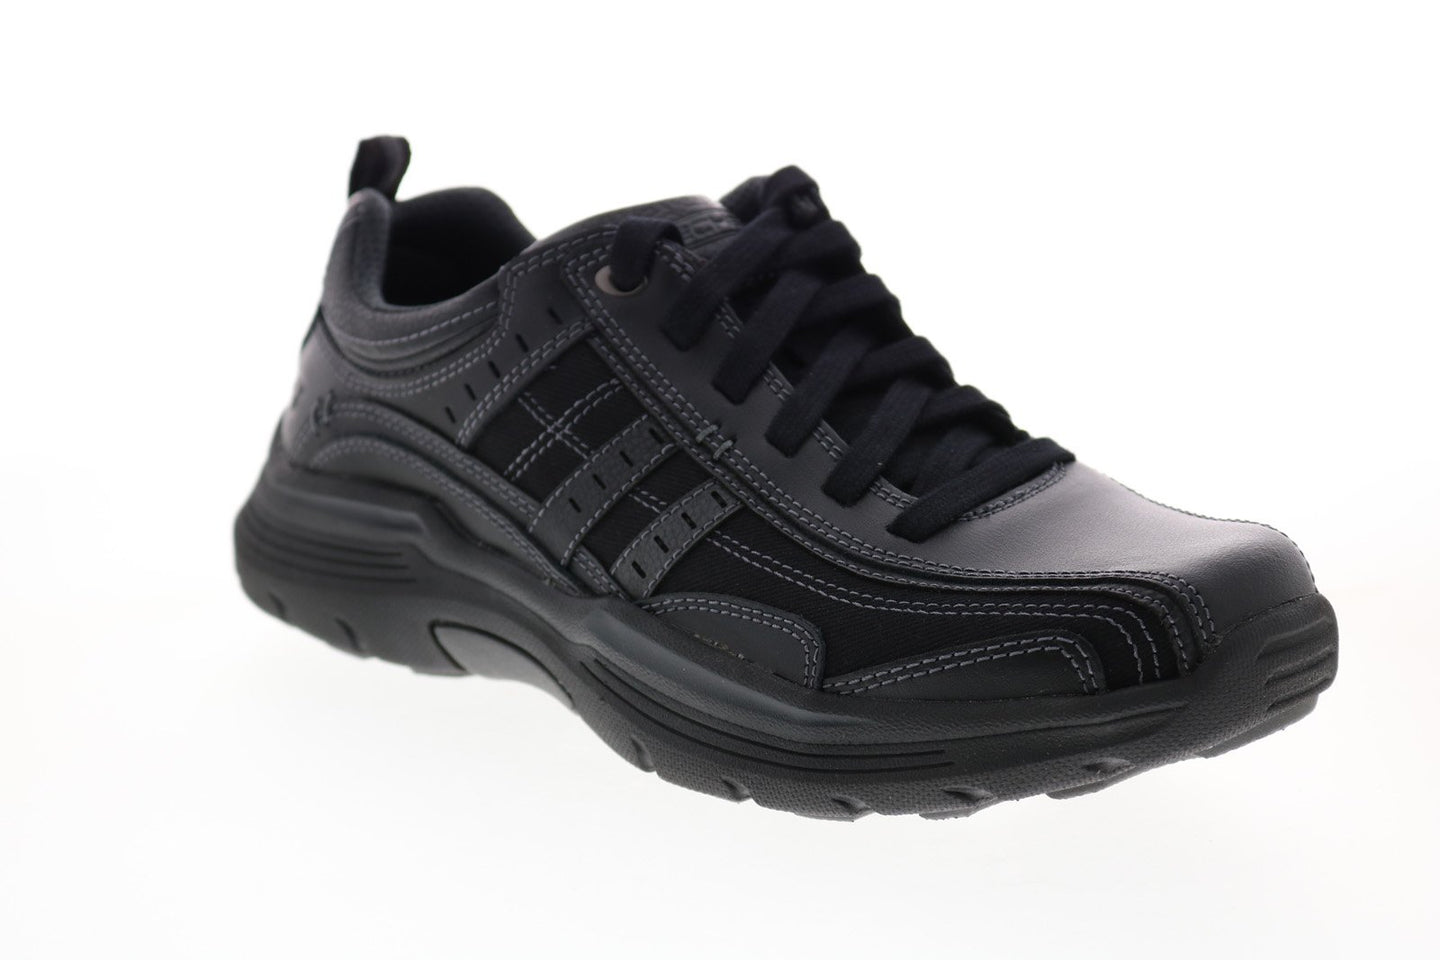 Skechers Expended Manden 66299 Mens Black Synthetic Lifestyle Sneakers ...